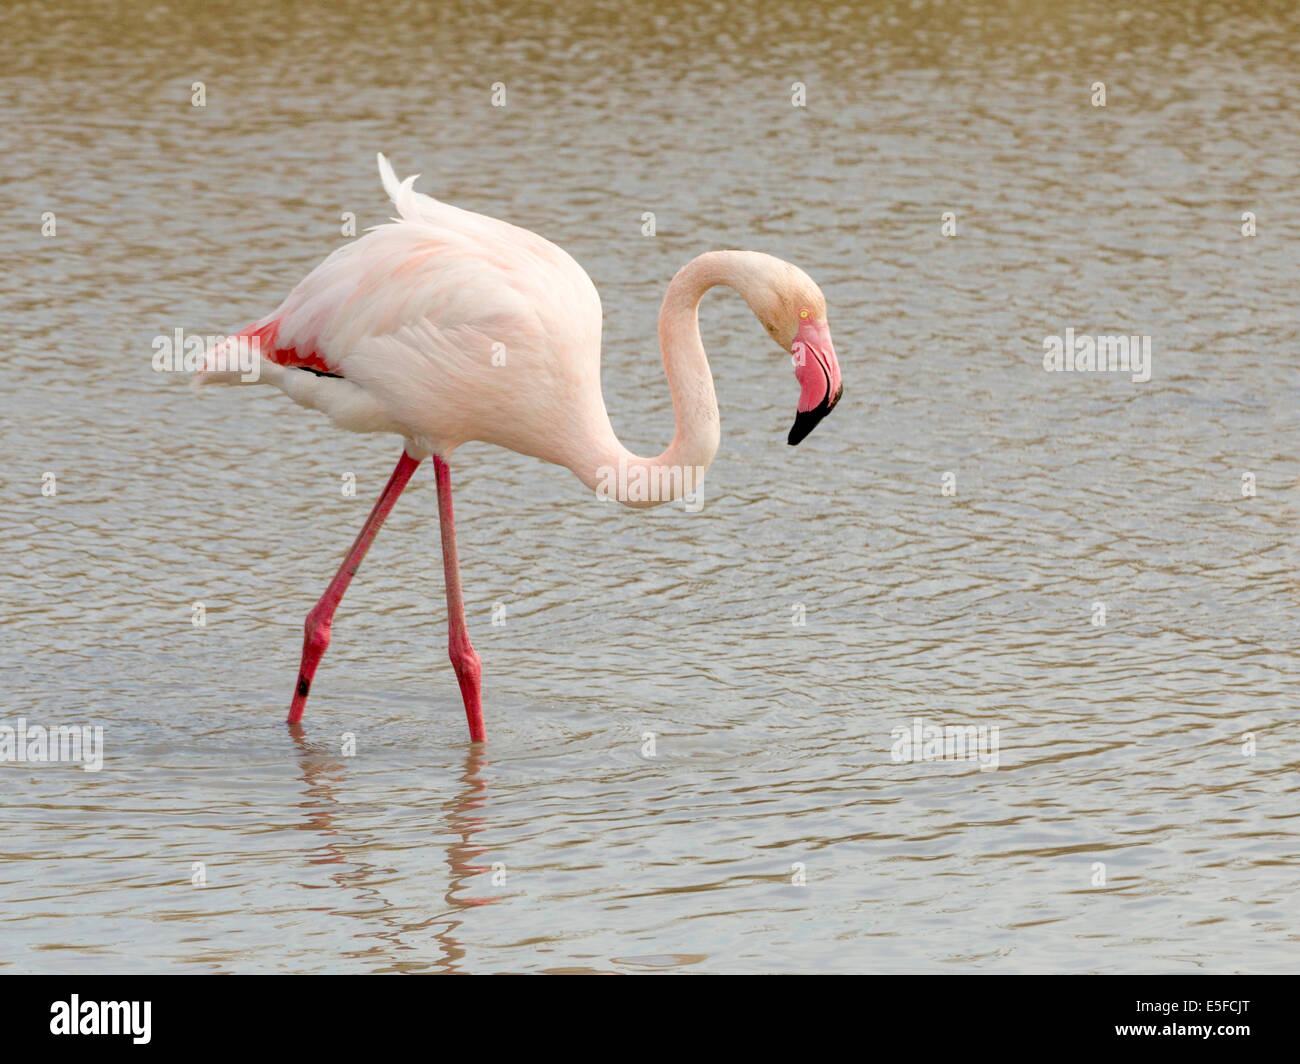 Greater flamingo standing in water Stock Photo